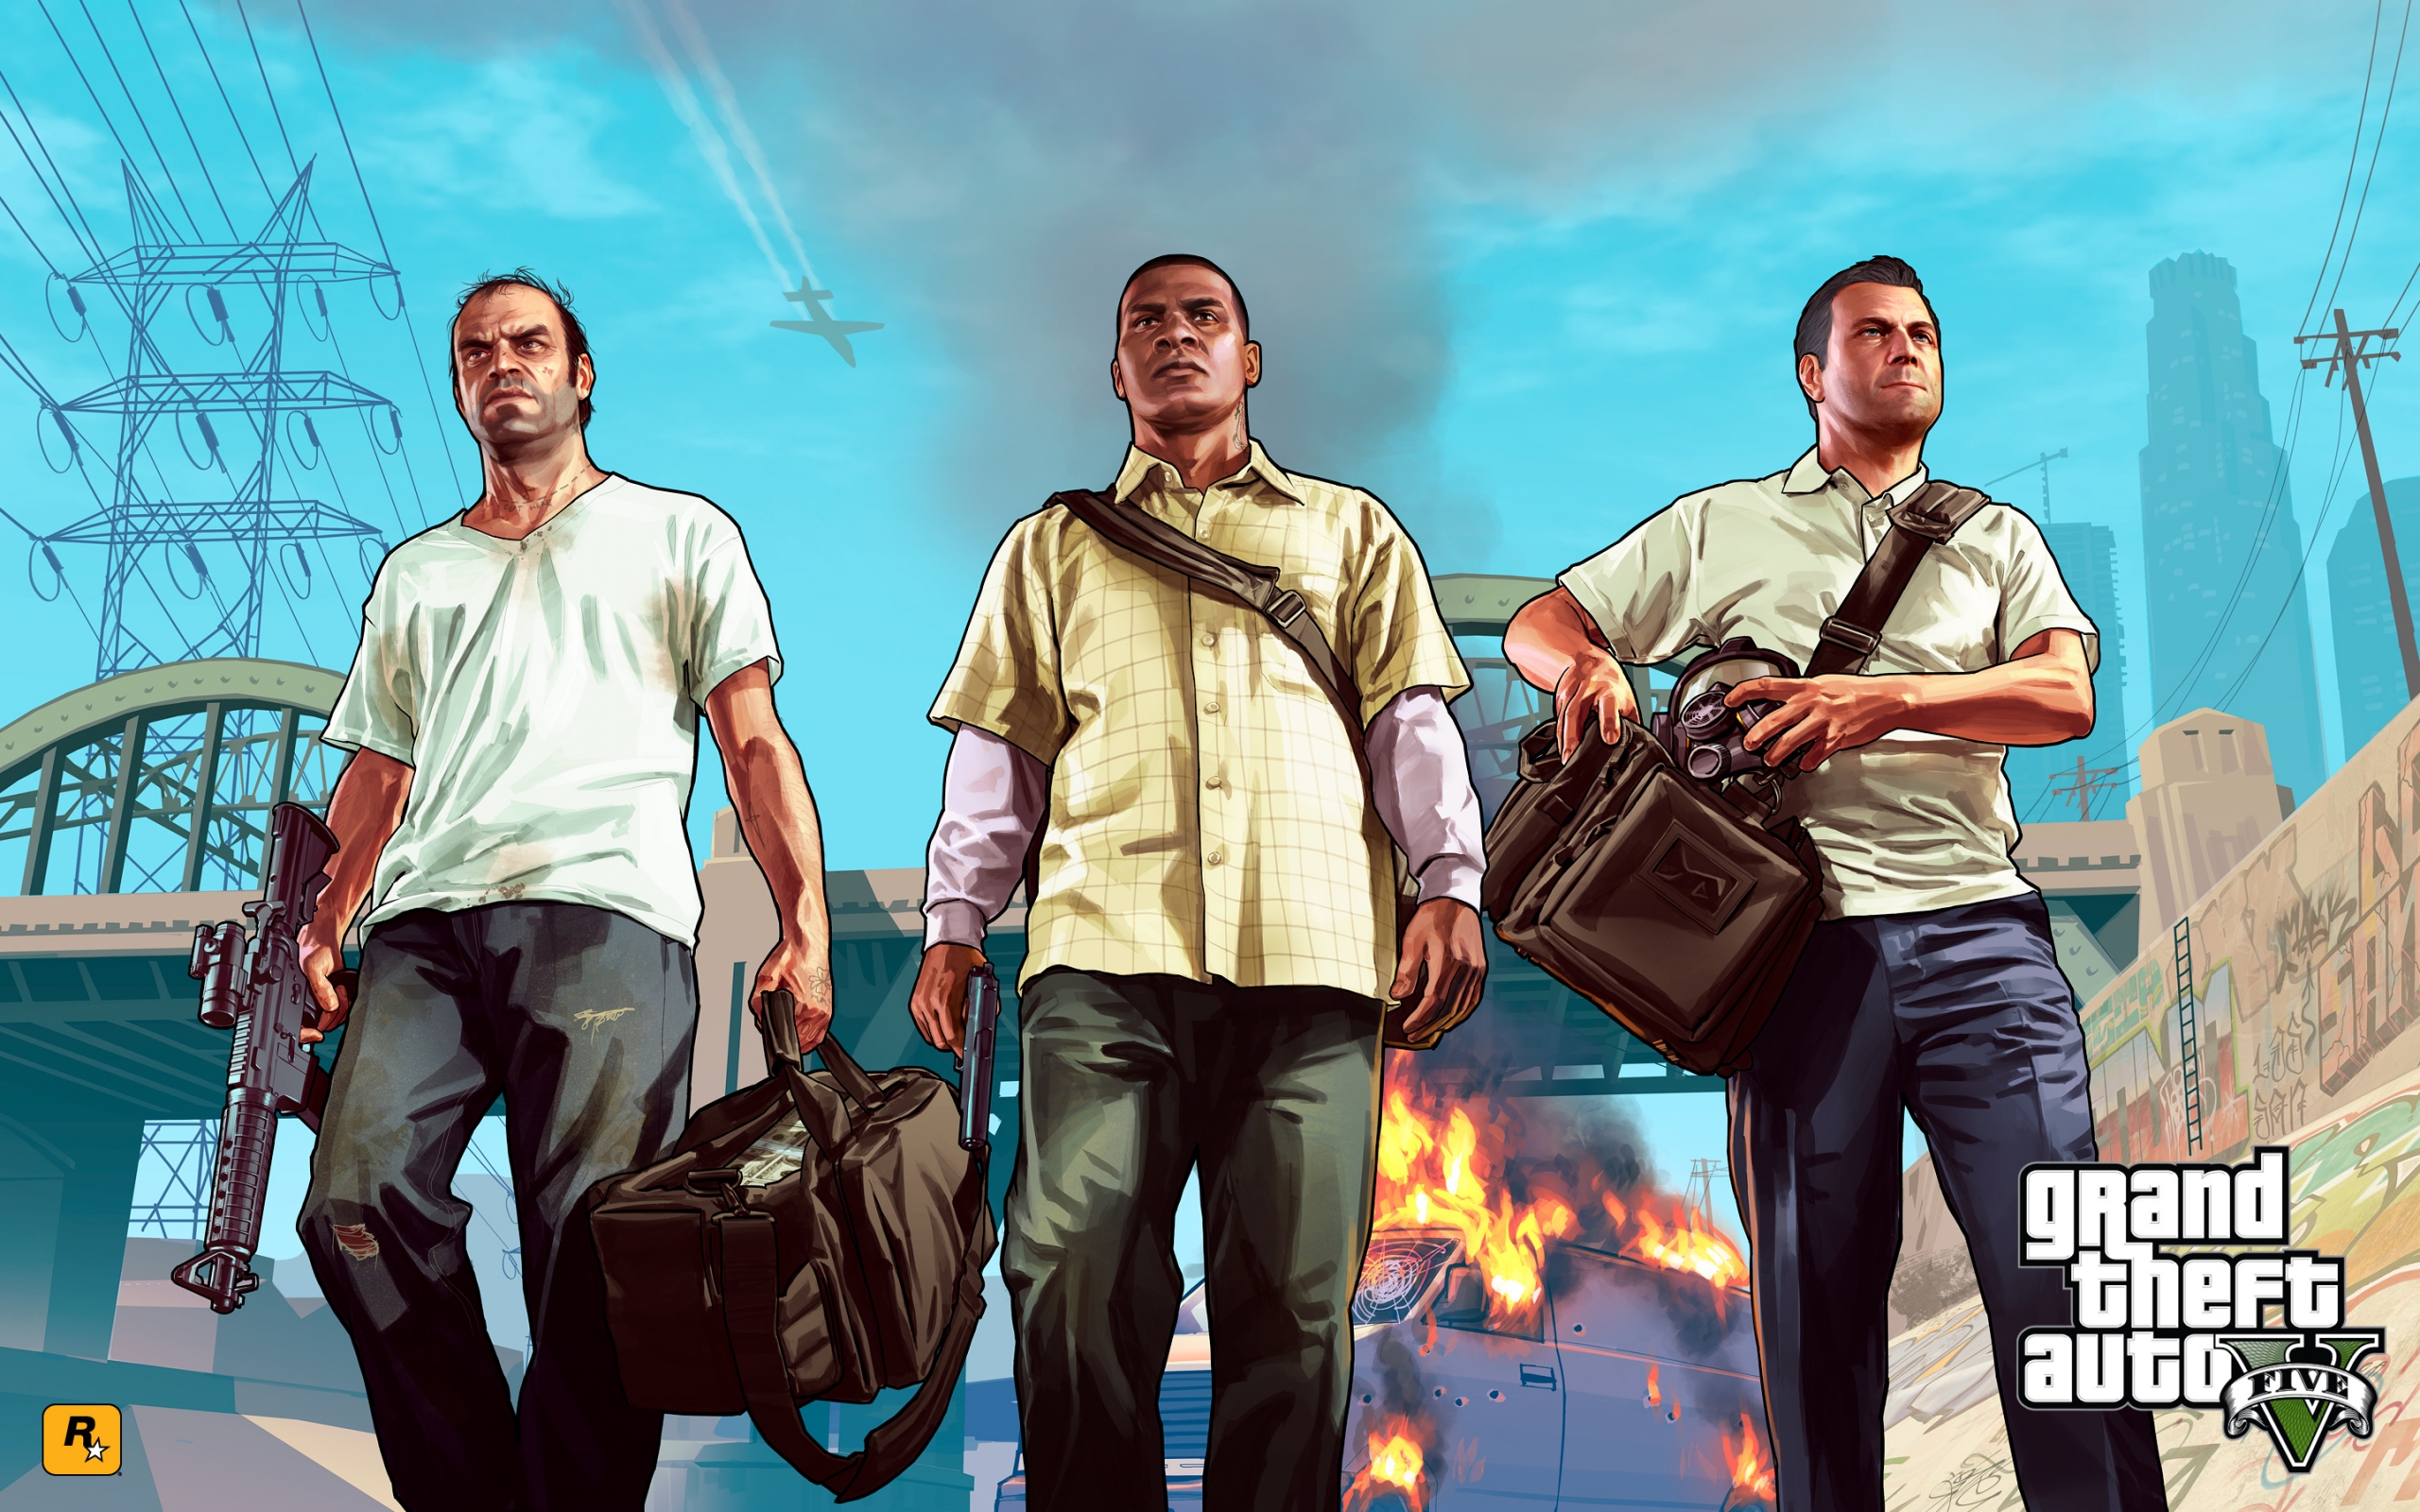 Gta 5 Main Characters for 2560 x 1600 widescreen resolution